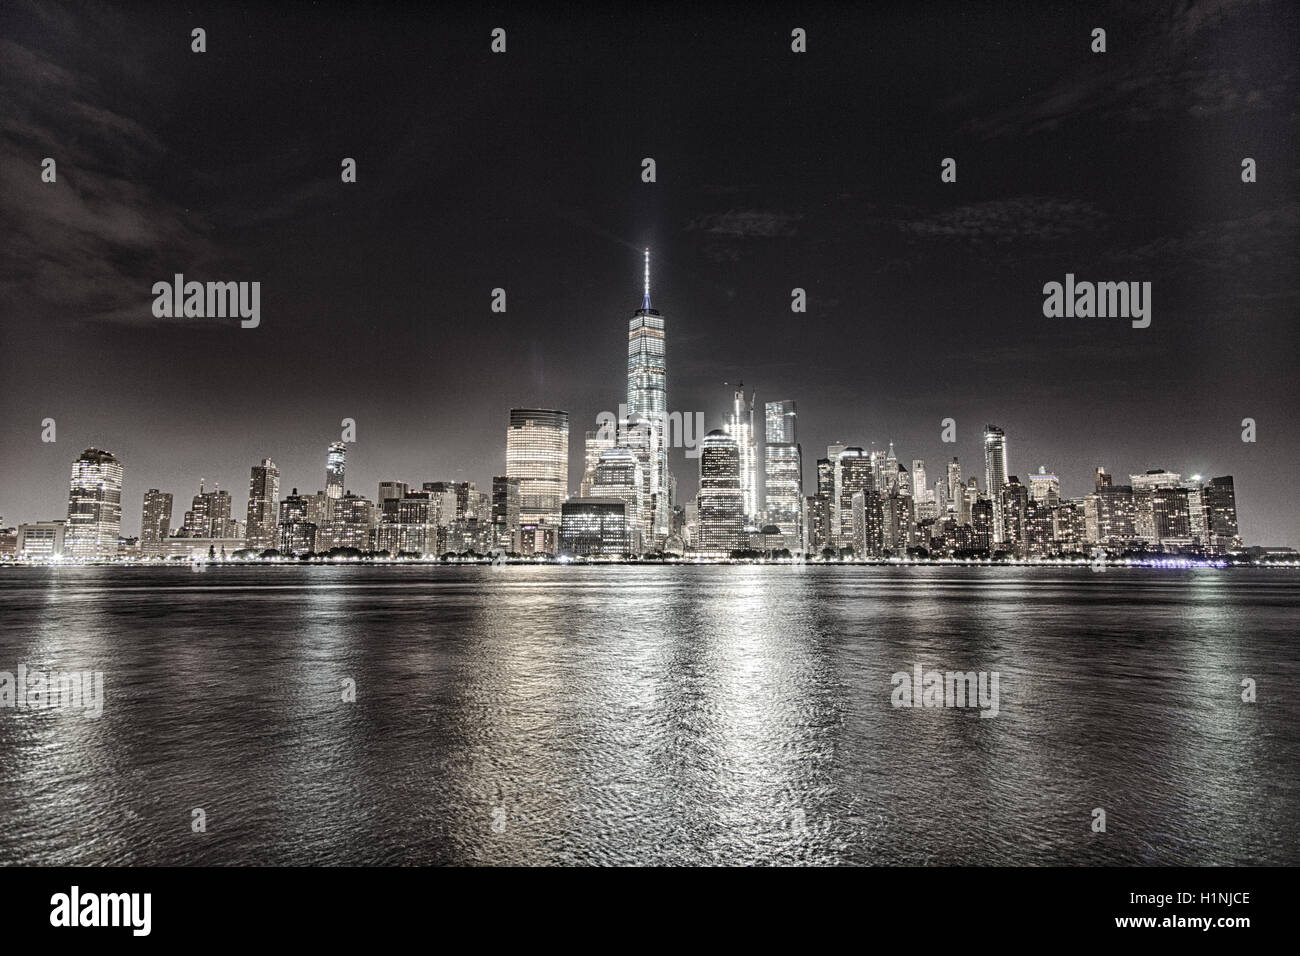 New York City, New York, USA, August 12, 2016: The FInancial district skyline of New York City as seen from Jersey City, NJ. Stock Photo